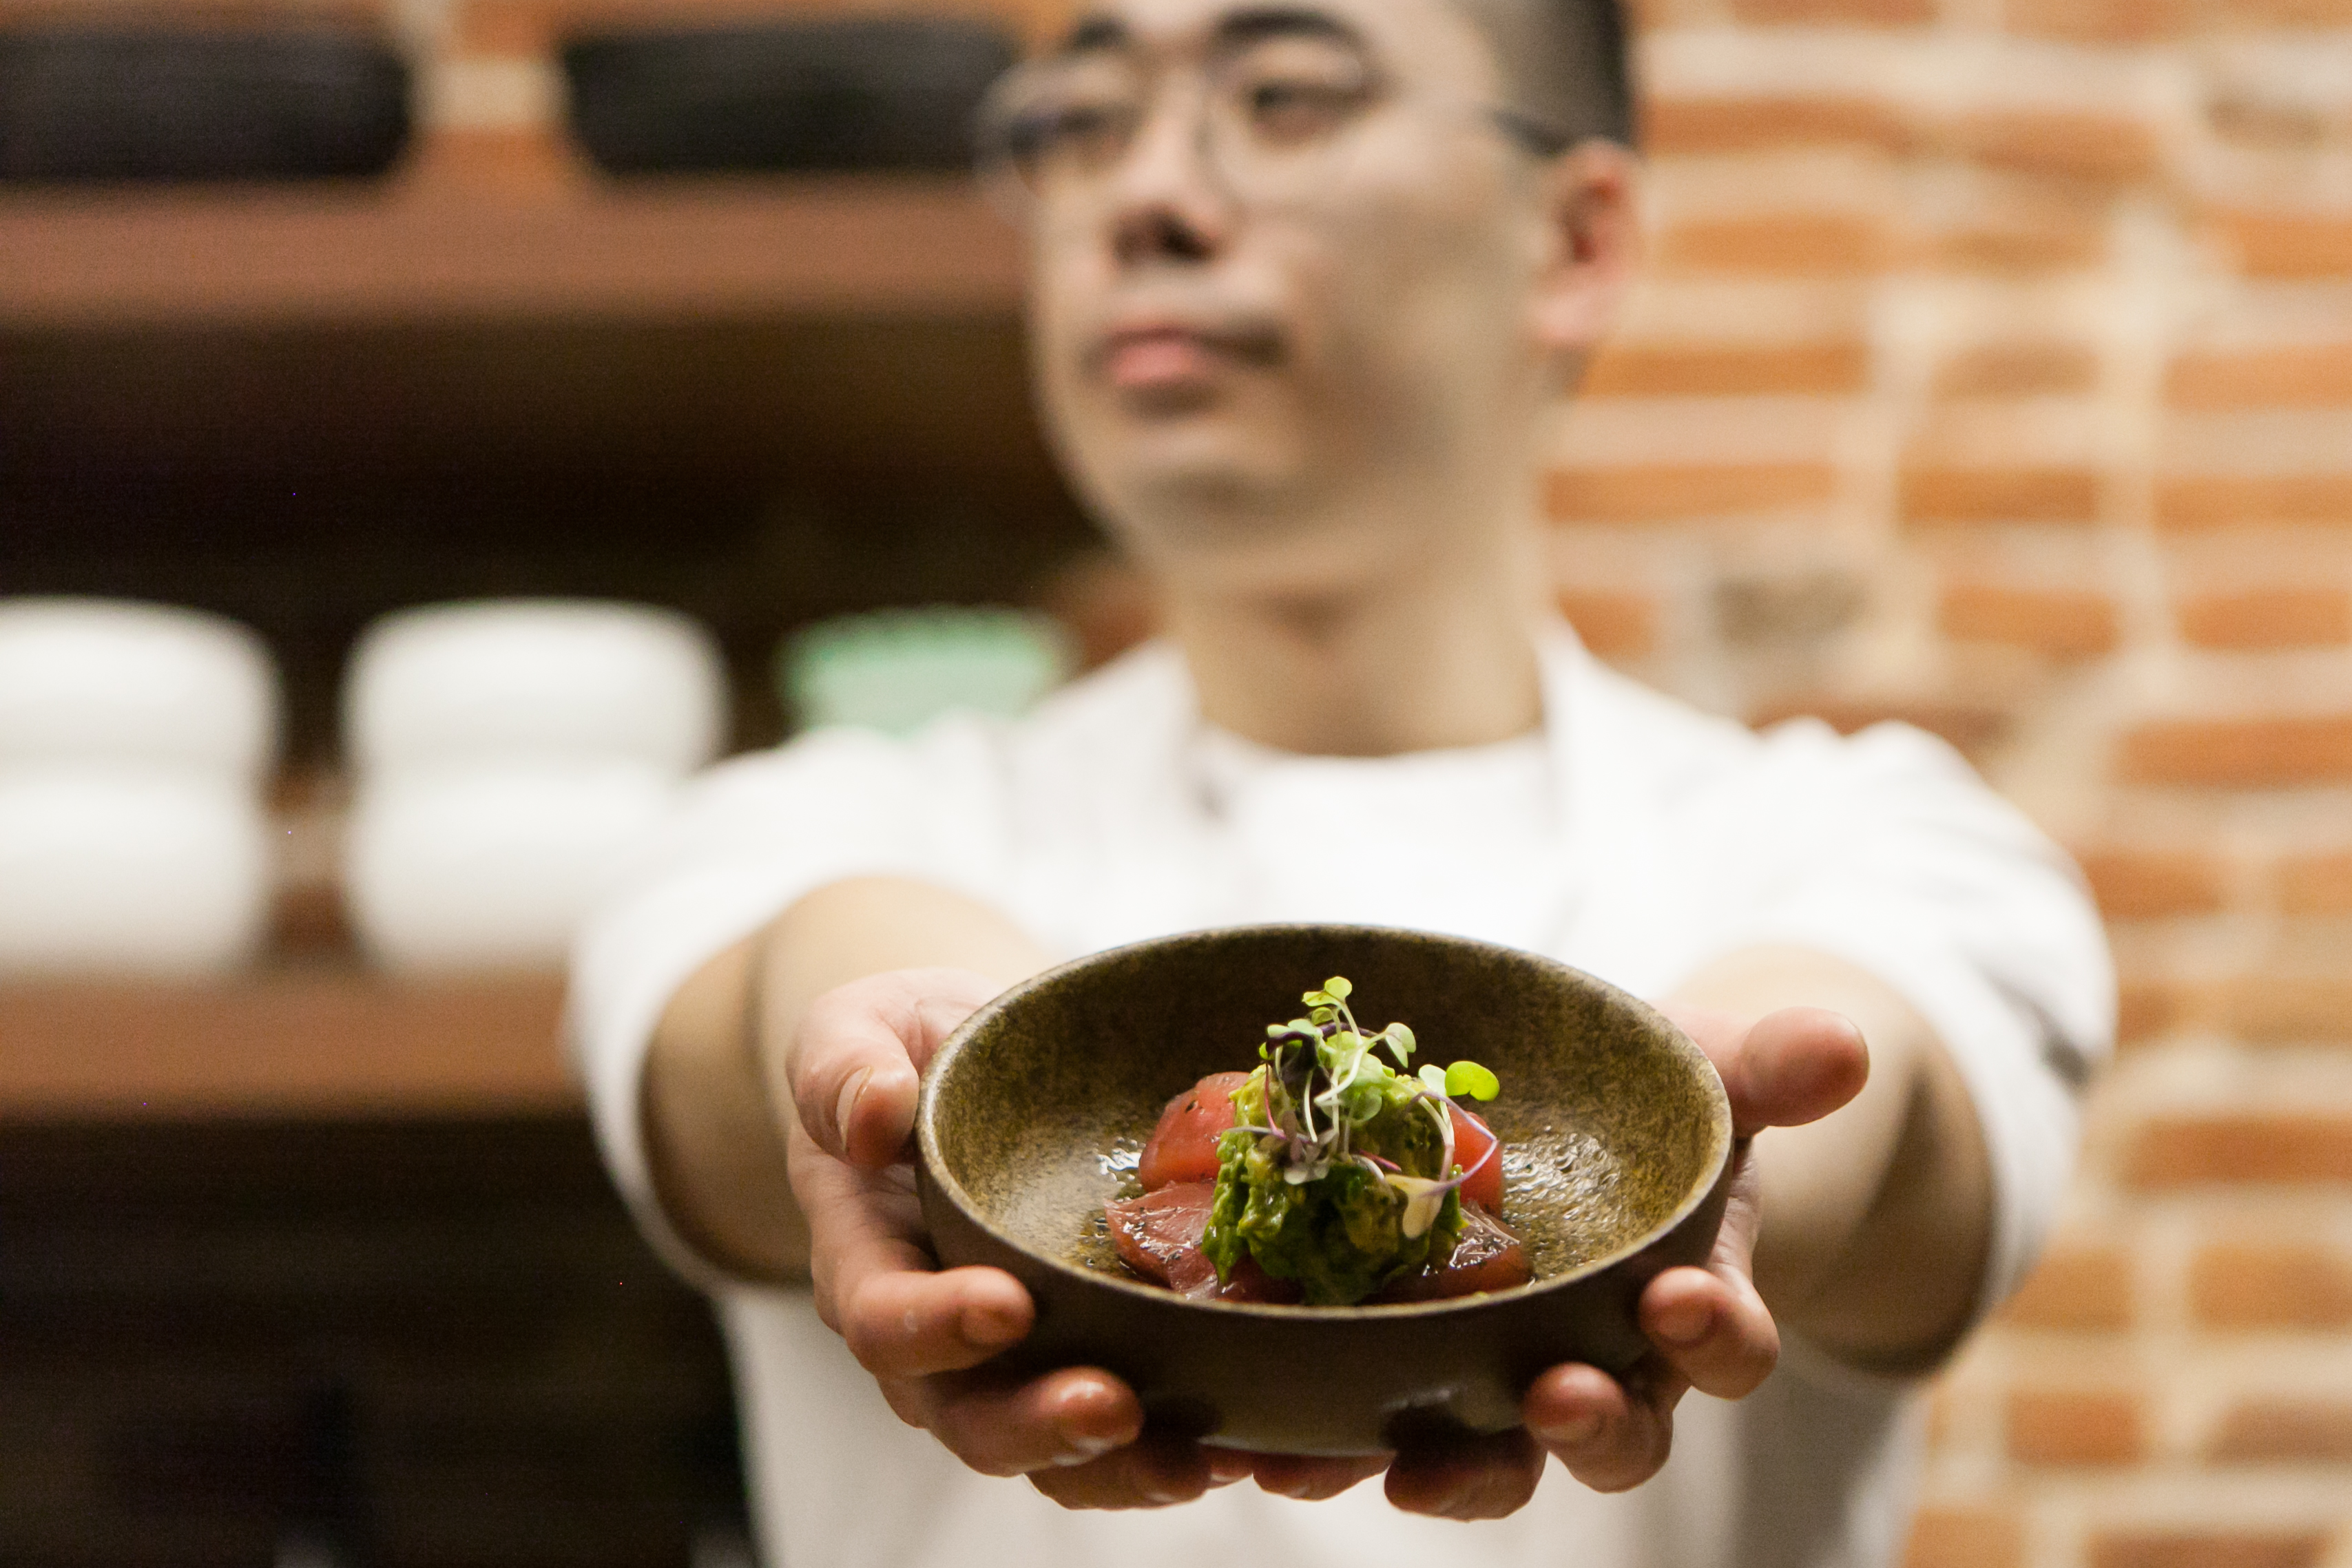 A male chef of Asian descent with arms outstretched in front of him holds a plate of sushi cupped in both hands while he looks away from the camera